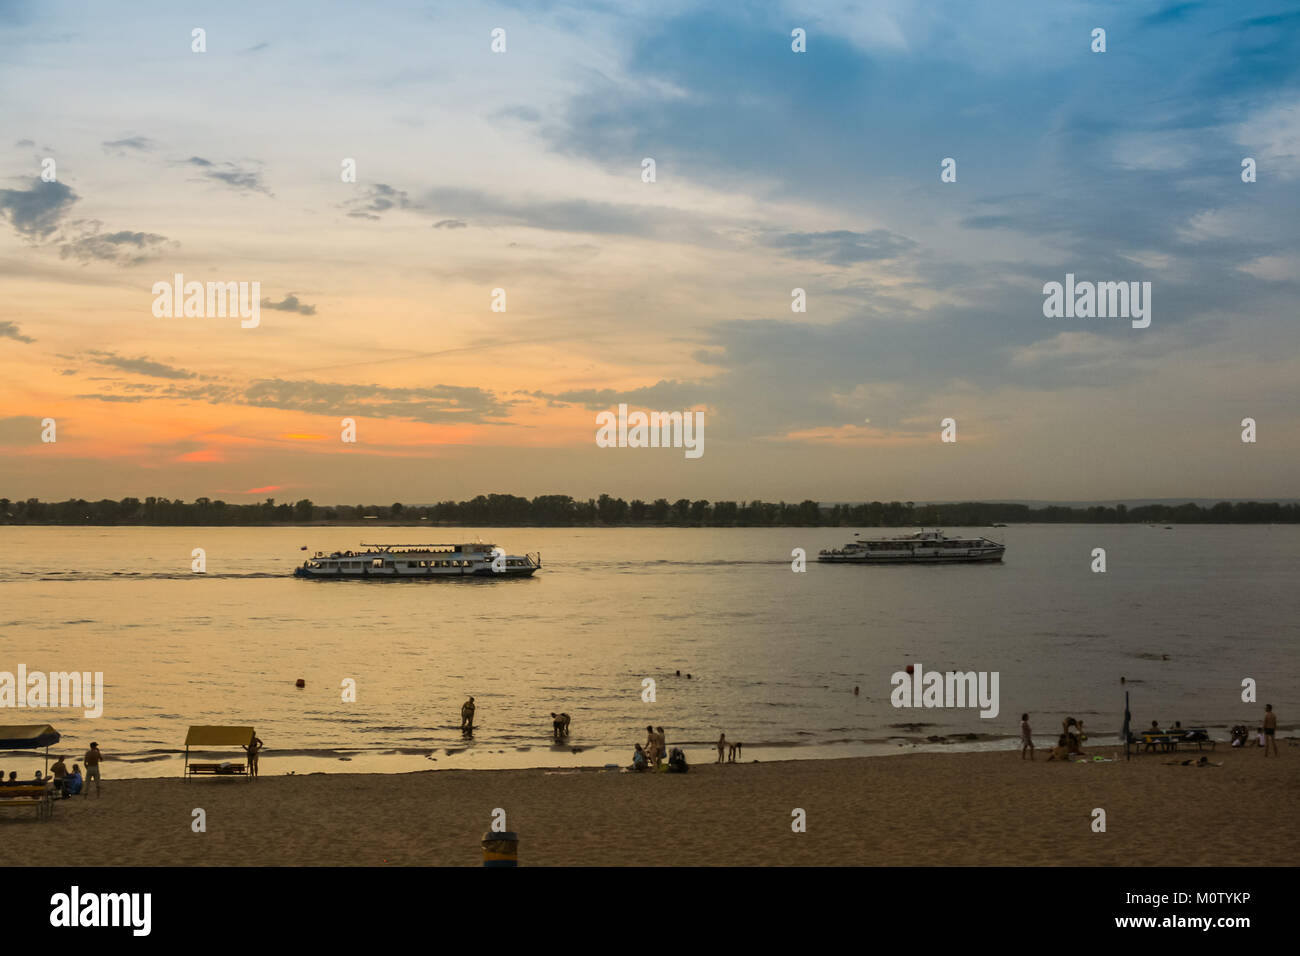 Sunset on the Volga river with pleasure boats and bathing people. Stock Photo